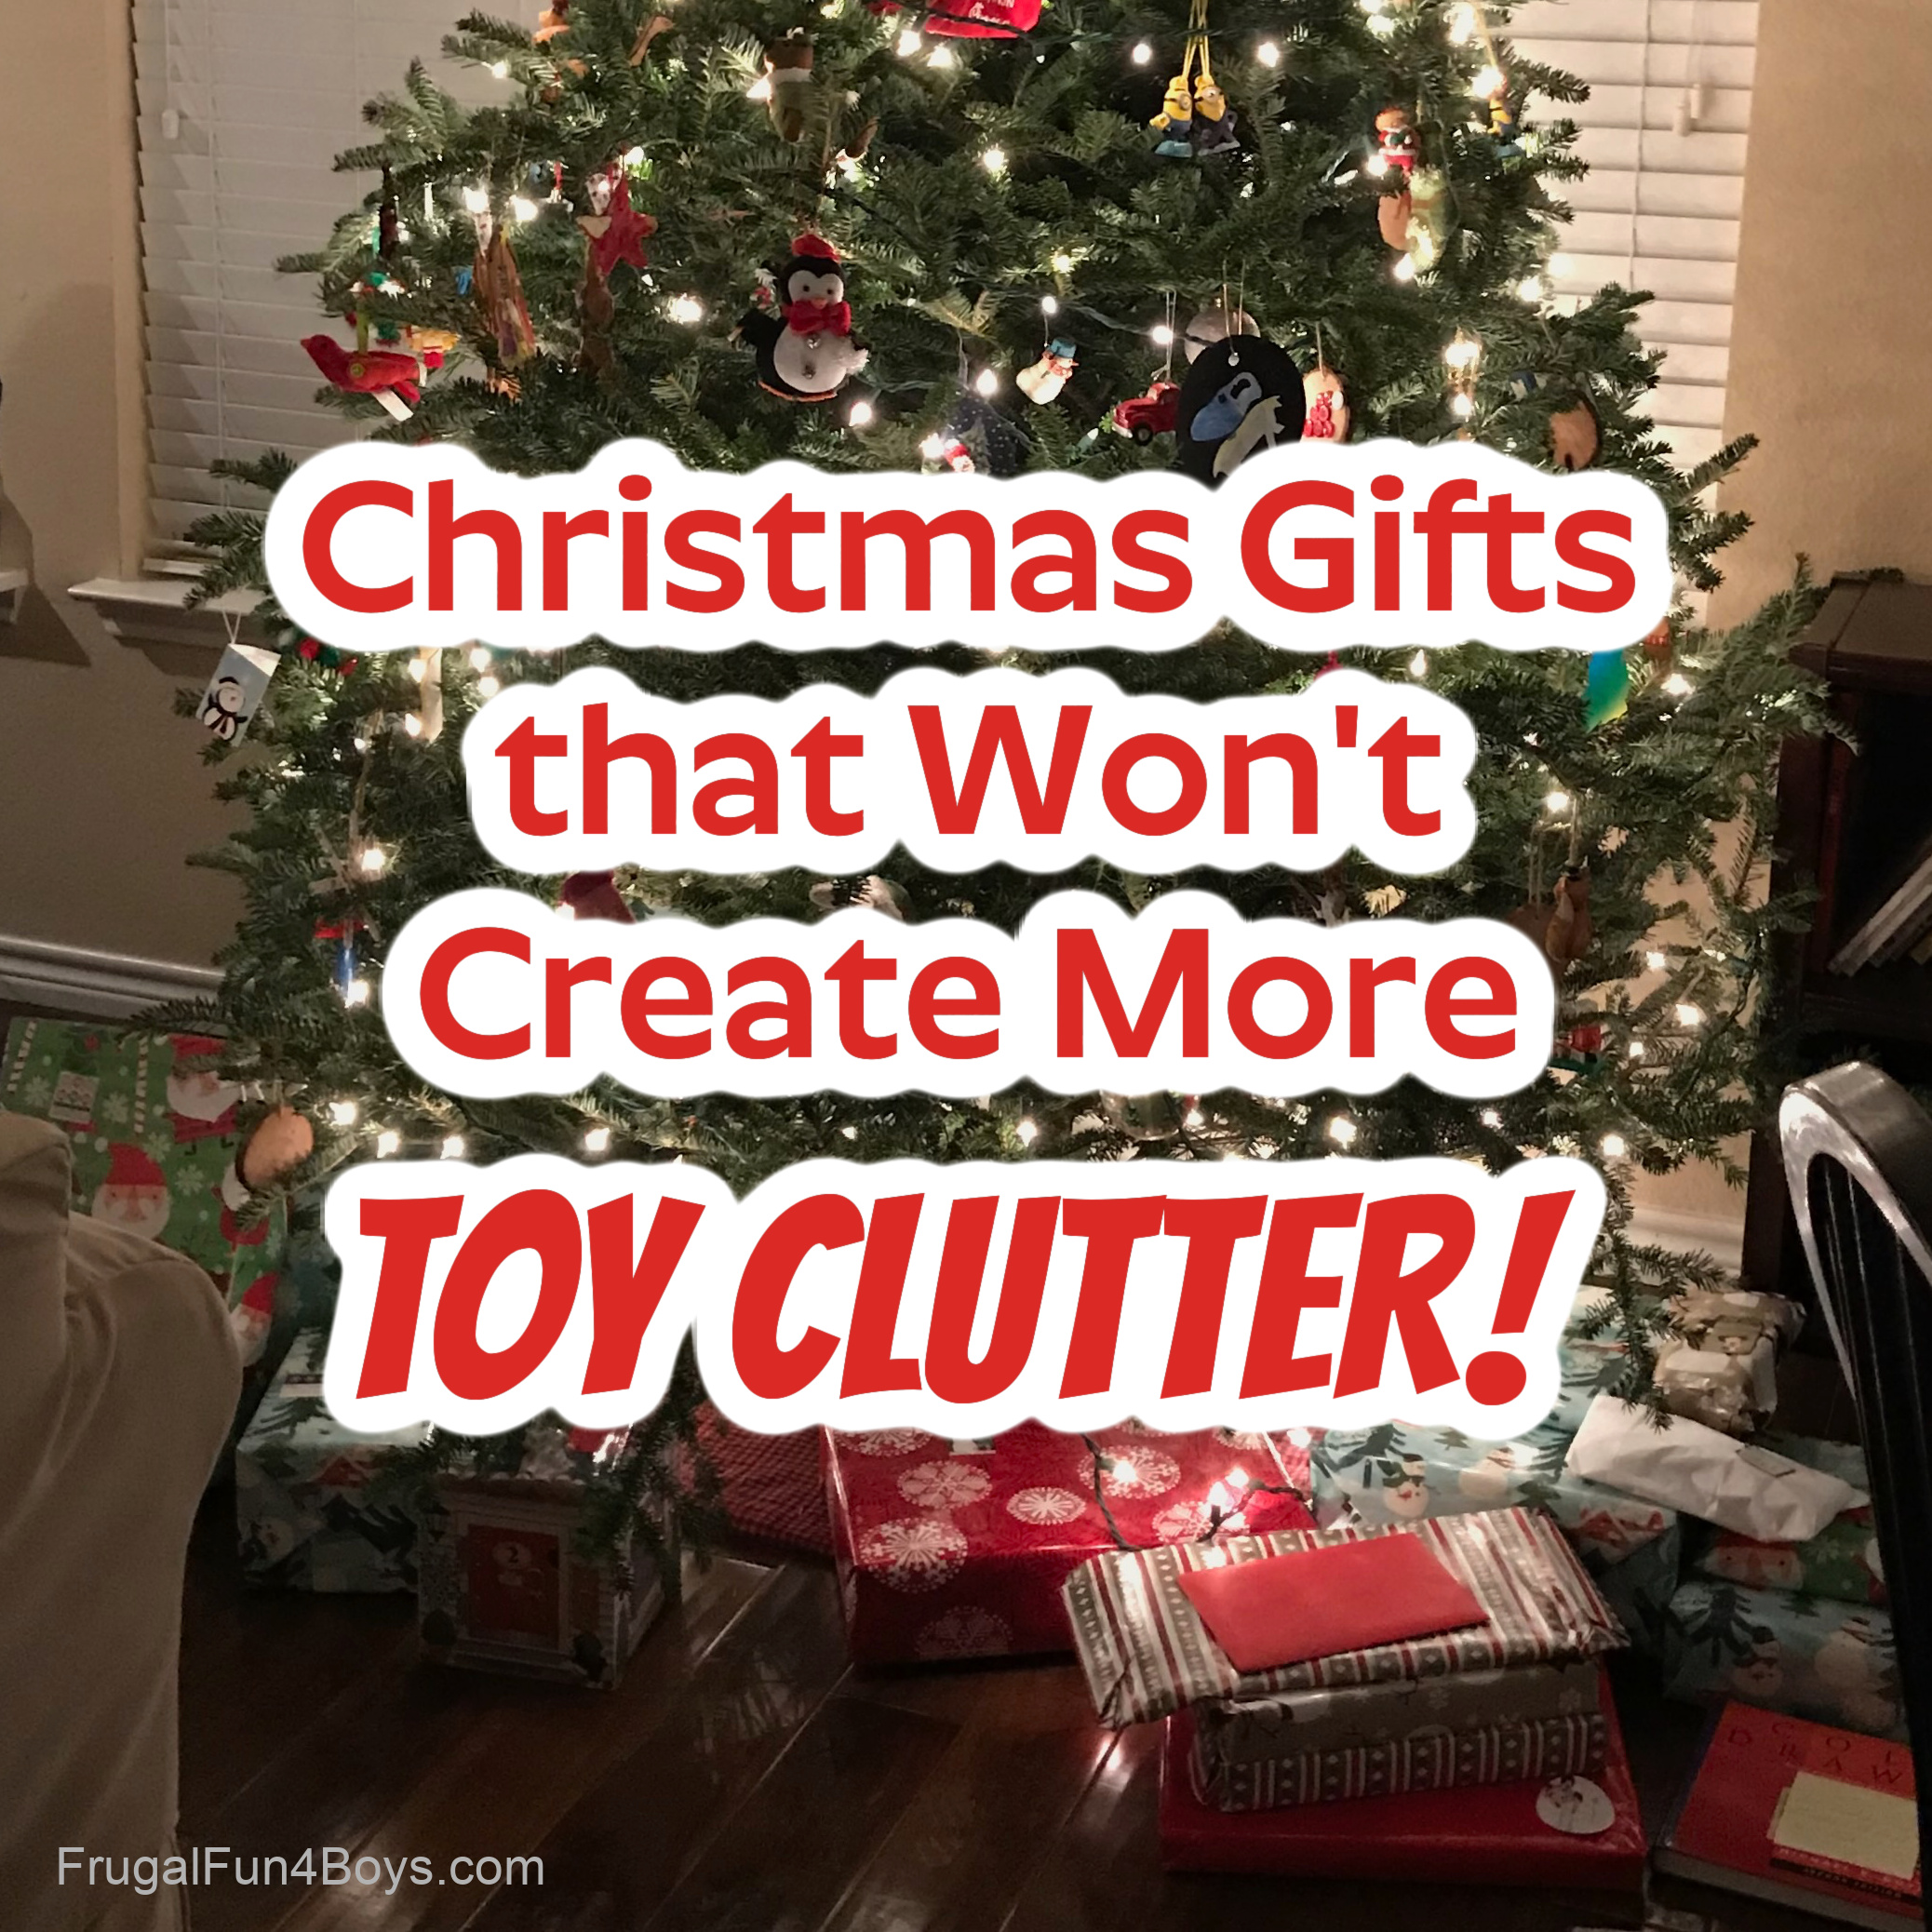 Awesome gift ideas for kids that cost under $10 (and aren't junk!) - The  Many Little Joys